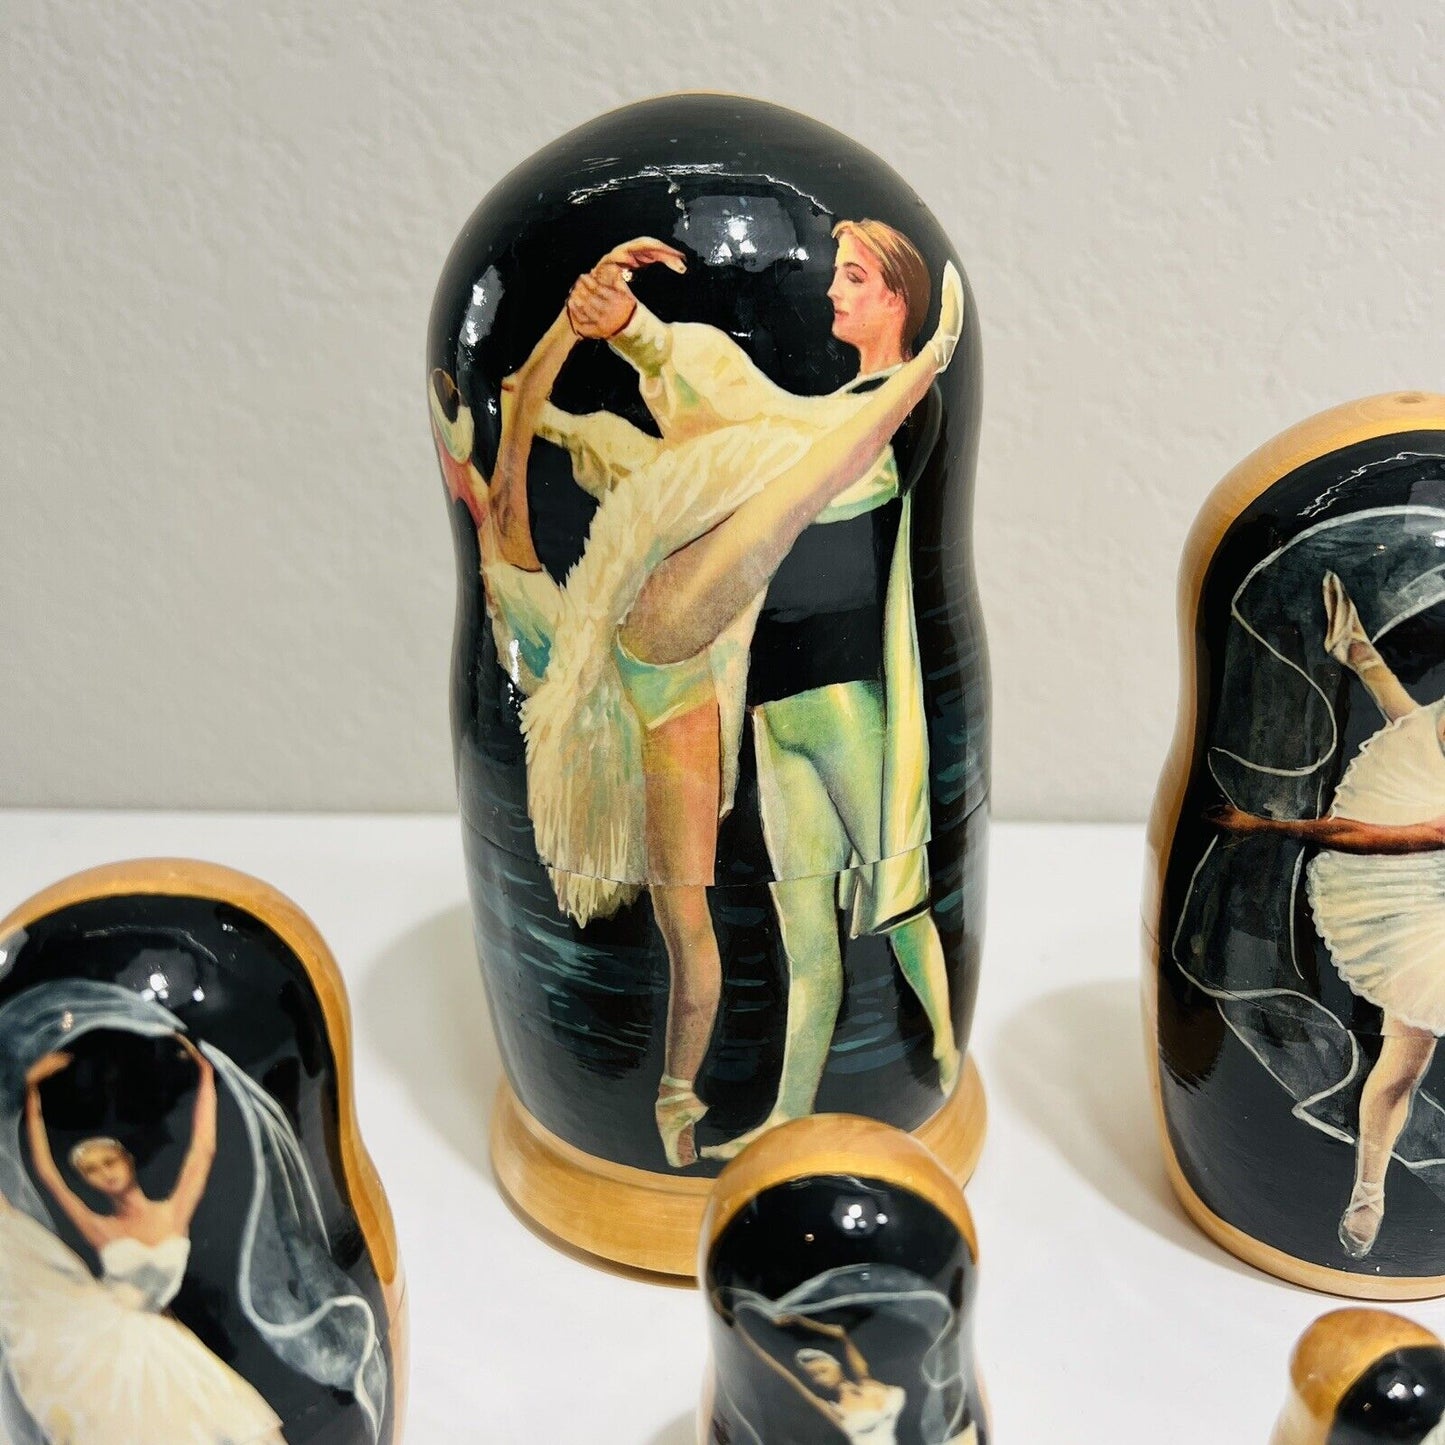 Nesting Doll Ballet Poses Wood Stacking Set 5 Pieces Dancing Women